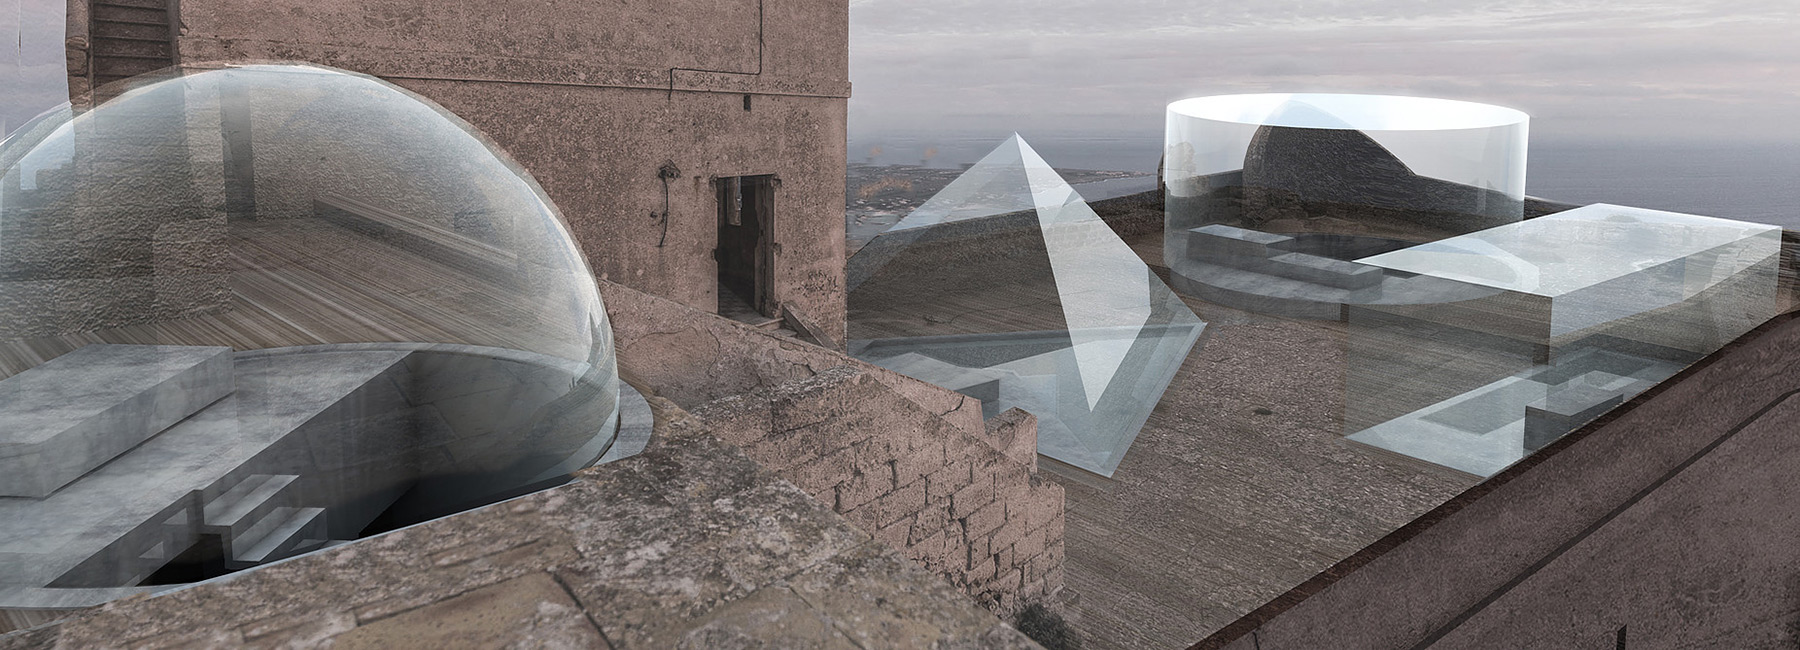 opposite office proposes to transform historic sicilian castle with geometric additions